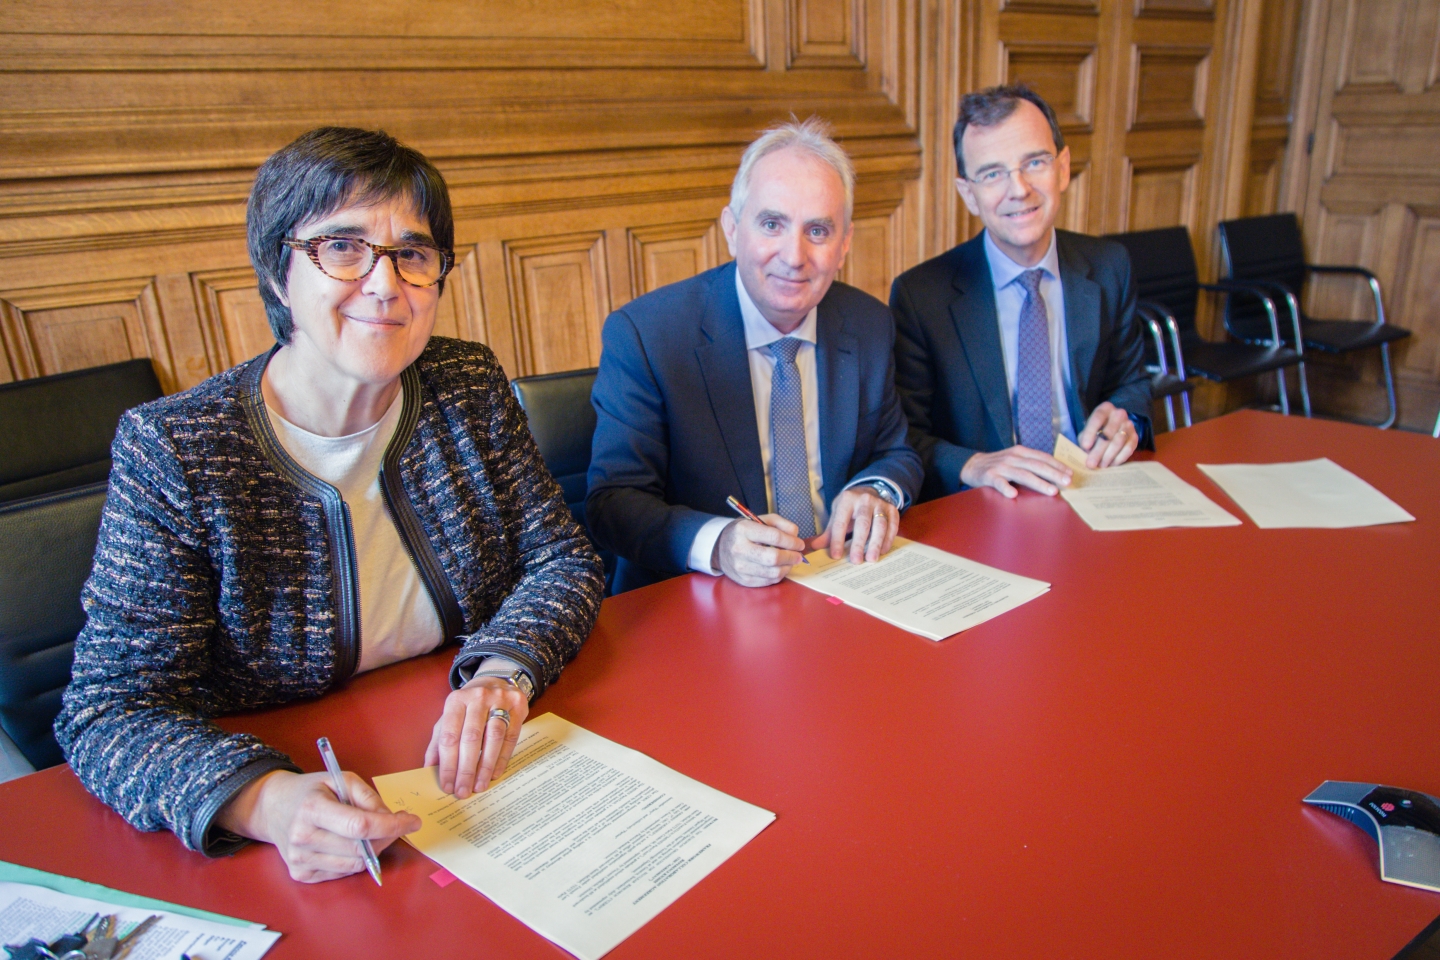 Collaboration agreement between CERN and the École des Mines